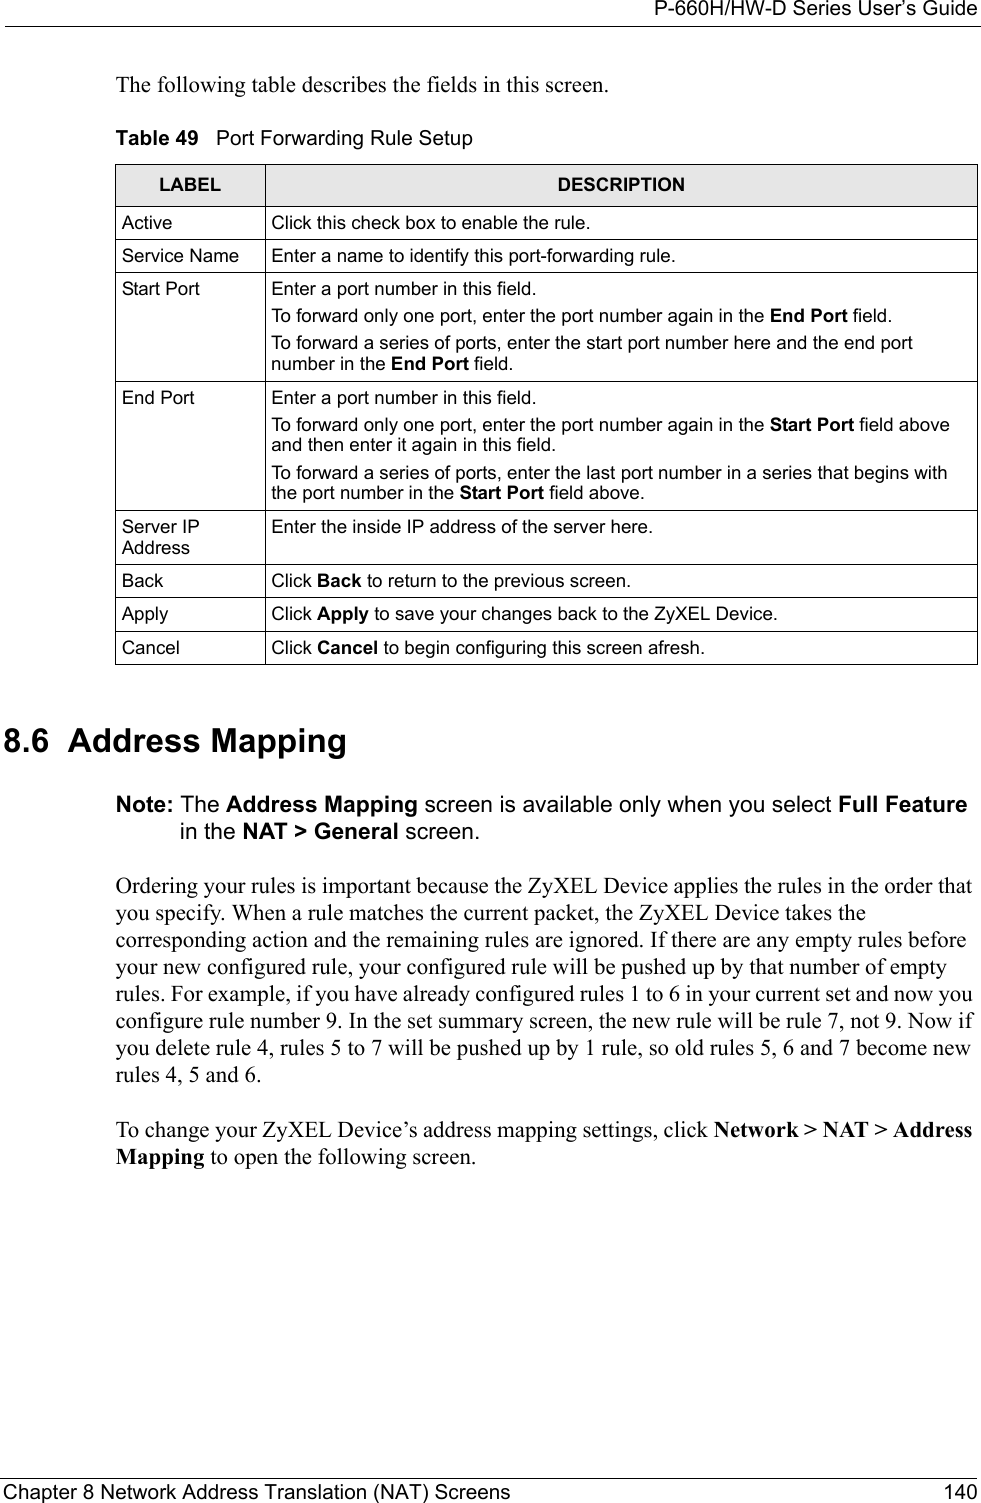 P-660H/HW-D Series User’s GuideChapter 8 Network Address Translation (NAT) Screens 140The following table describes the fields in this screen. 8.6  Address Mapping Note: The Address Mapping screen is available only when you select Full Feature in the NAT &gt; General screen.Ordering your rules is important because the ZyXEL Device applies the rules in the order that you specify. When a rule matches the current packet, the ZyXEL Device takes the corresponding action and the remaining rules are ignored. If there are any empty rules before your new configured rule, your configured rule will be pushed up by that number of empty rules. For example, if you have already configured rules 1 to 6 in your current set and now you configure rule number 9. In the set summary screen, the new rule will be rule 7, not 9. Now if you delete rule 4, rules 5 to 7 will be pushed up by 1 rule, so old rules 5, 6 and 7 become new rules 4, 5 and 6. To change your ZyXEL Device’s address mapping settings, click Network &gt; NAT &gt; Address Mapping to open the following screen. Table 49   Port Forwarding Rule Setup LABEL DESCRIPTIONActive Click this check box to enable the rule.Service Name Enter a name to identify this port-forwarding rule.Start Port  Enter a port number in this field. To forward only one port, enter the port number again in the End Port field. To forward a series of ports, enter the start port number here and the end port number in the End Port field.End Port  Enter a port number in this field. To forward only one port, enter the port number again in the Start Port field above and then enter it again in this field. To forward a series of ports, enter the last port number in a series that begins with the port number in the Start Port field above.Server IP AddressEnter the inside IP address of the server here.Back Click Back to return to the previous screen.Apply Click Apply to save your changes back to the ZyXEL Device.Cancel Click Cancel to begin configuring this screen afresh.